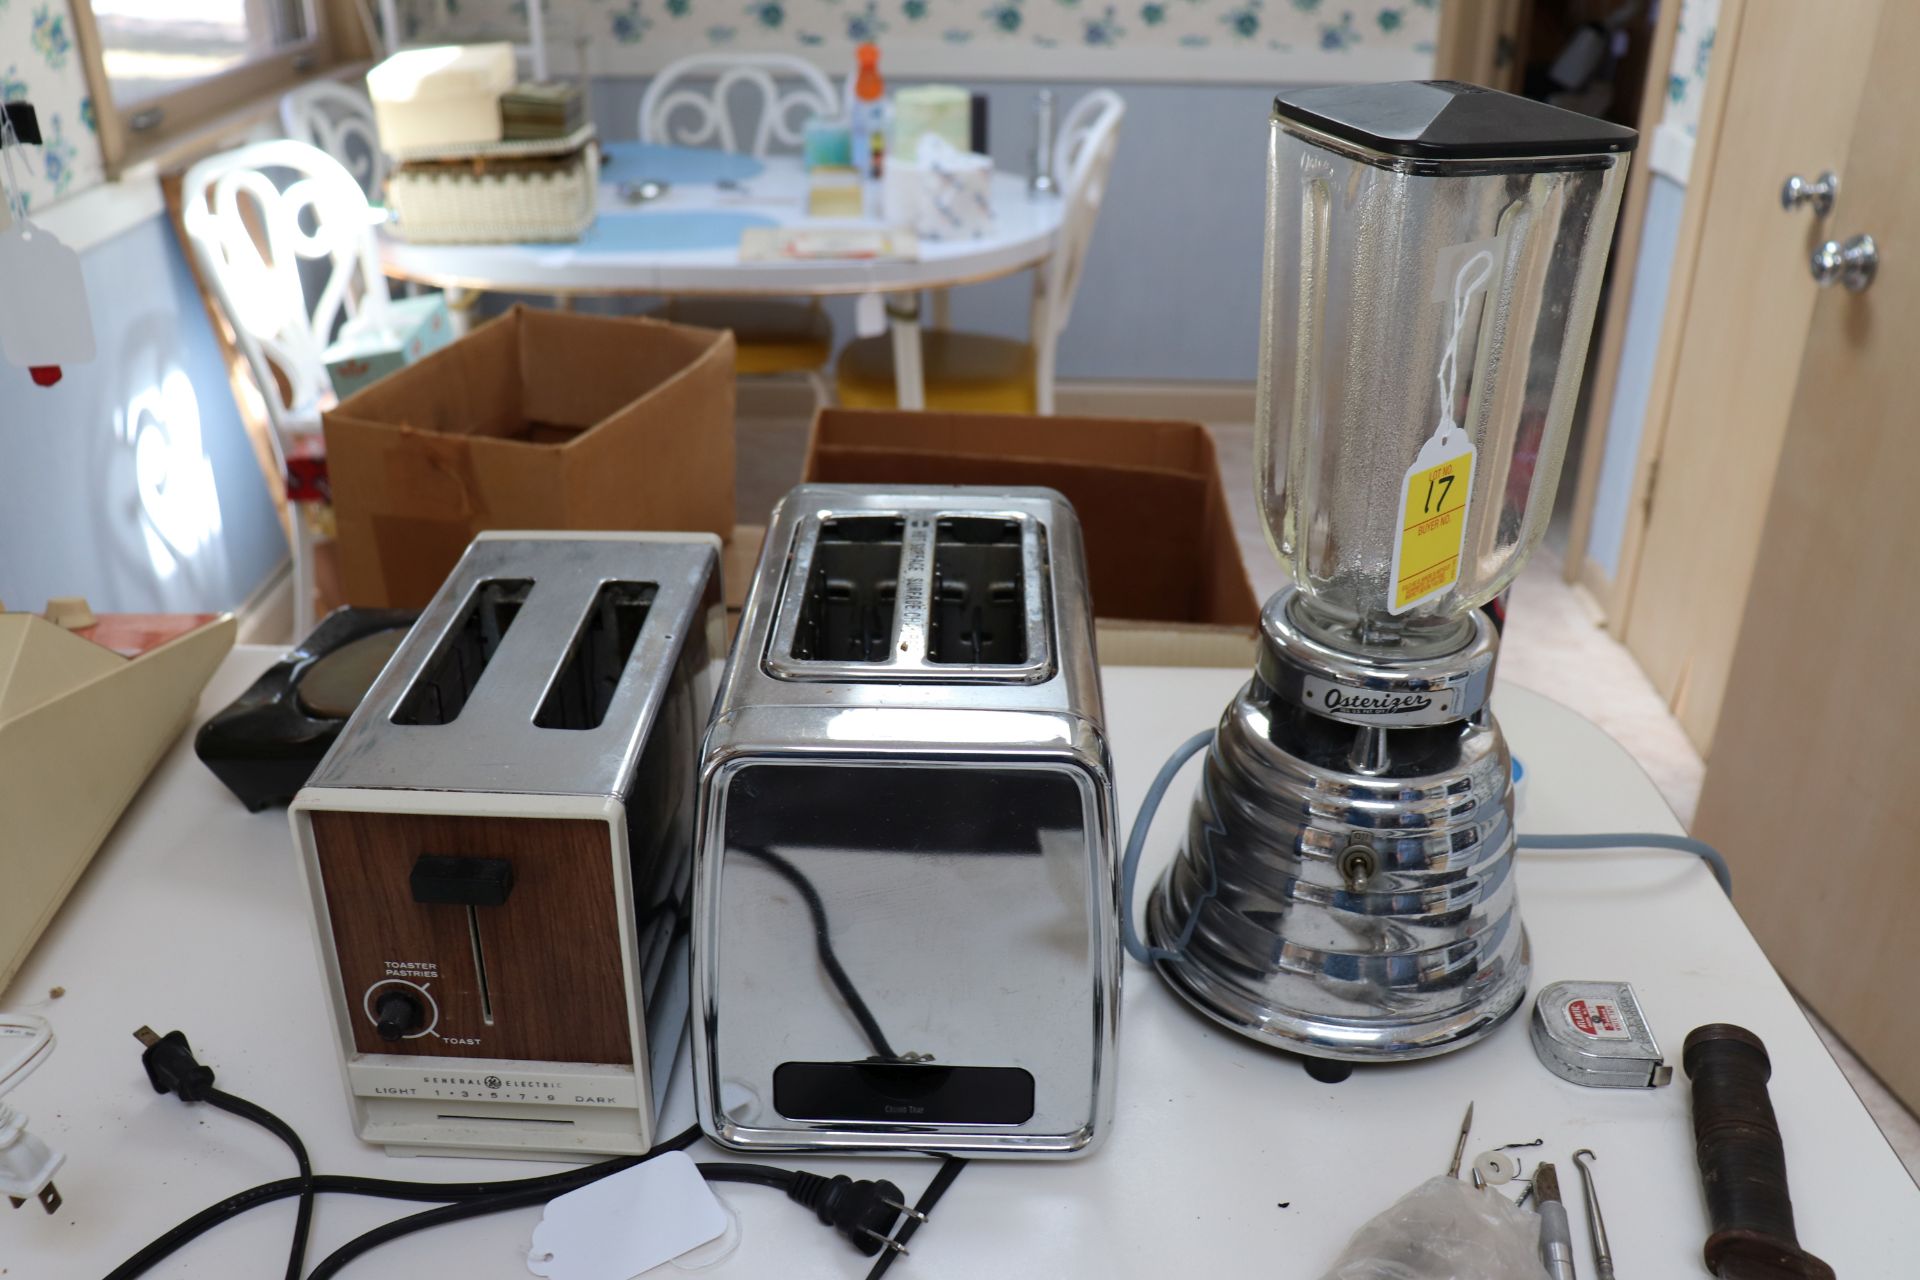 Two toasters, General Electric and Hamilton Beach, and an Osterizer blender